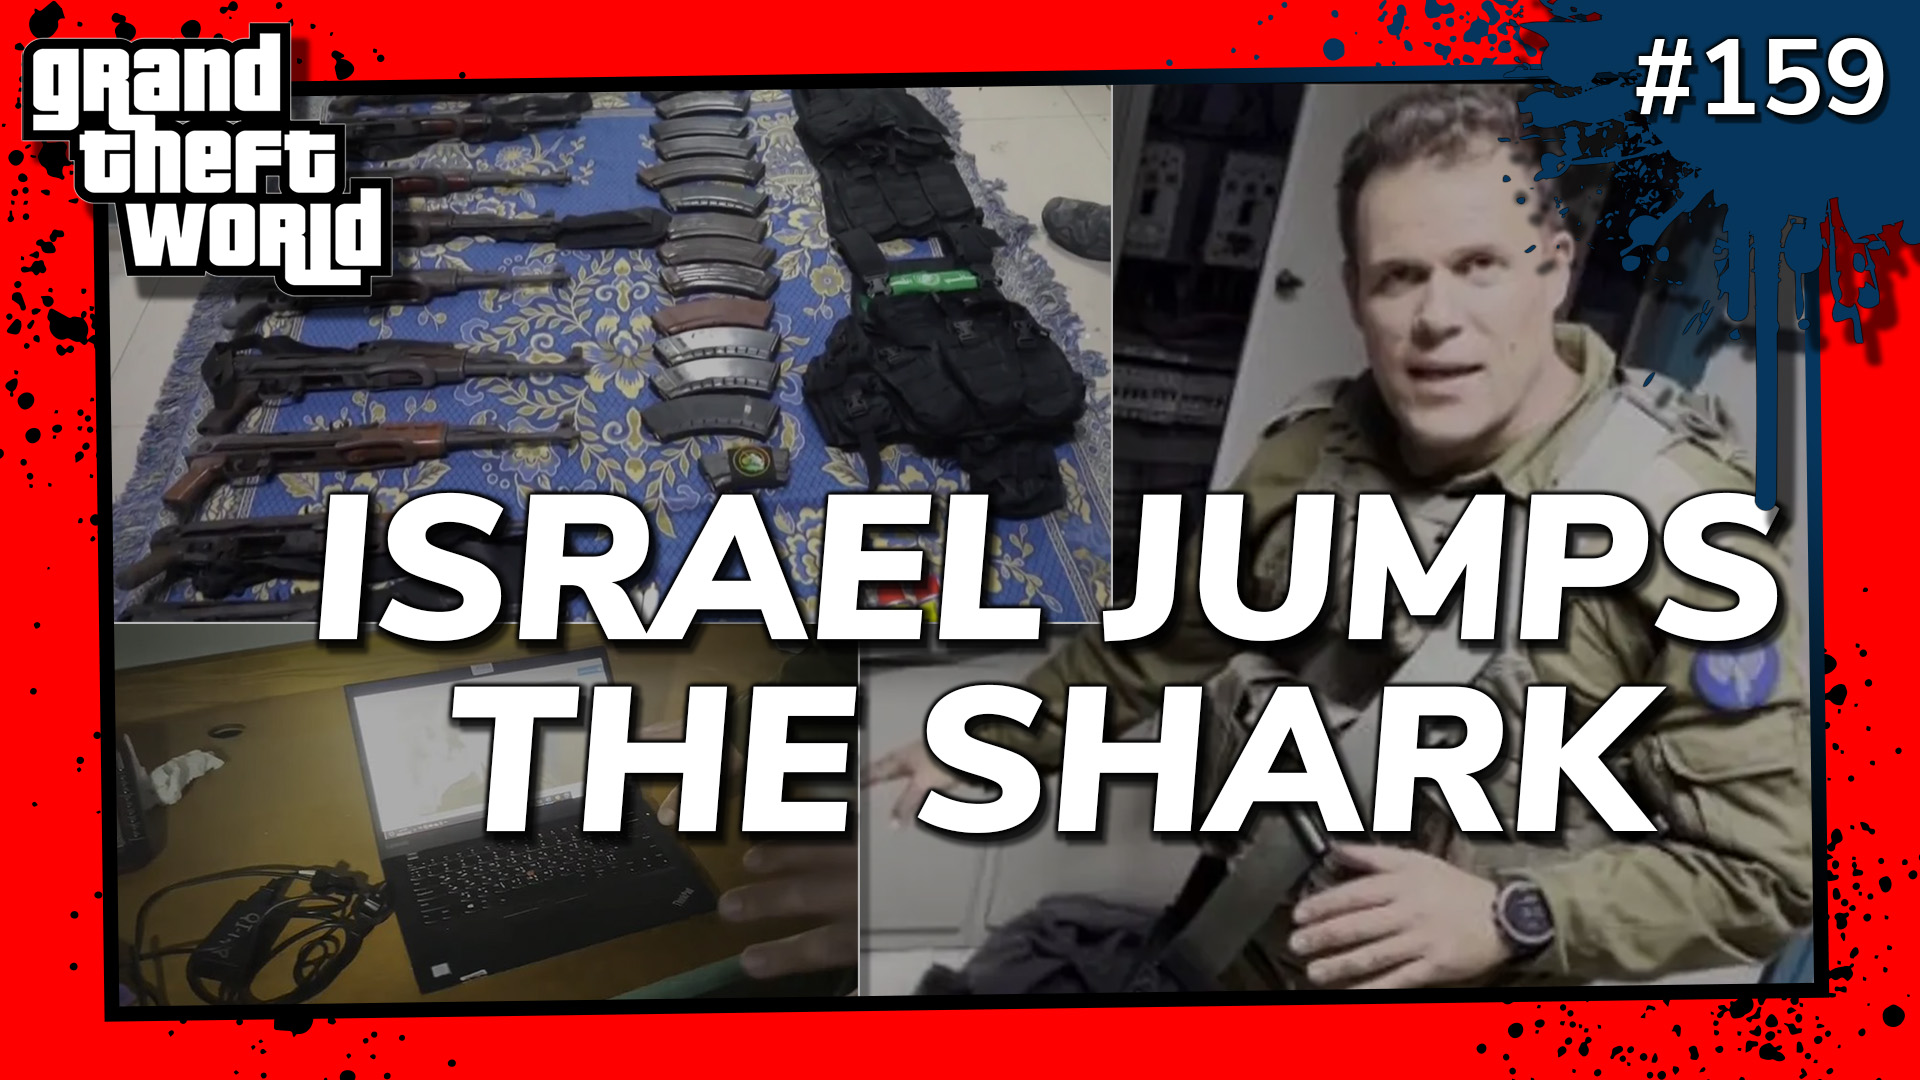 Grand Theft World Podcast 159 | Israel Jumps the Shark